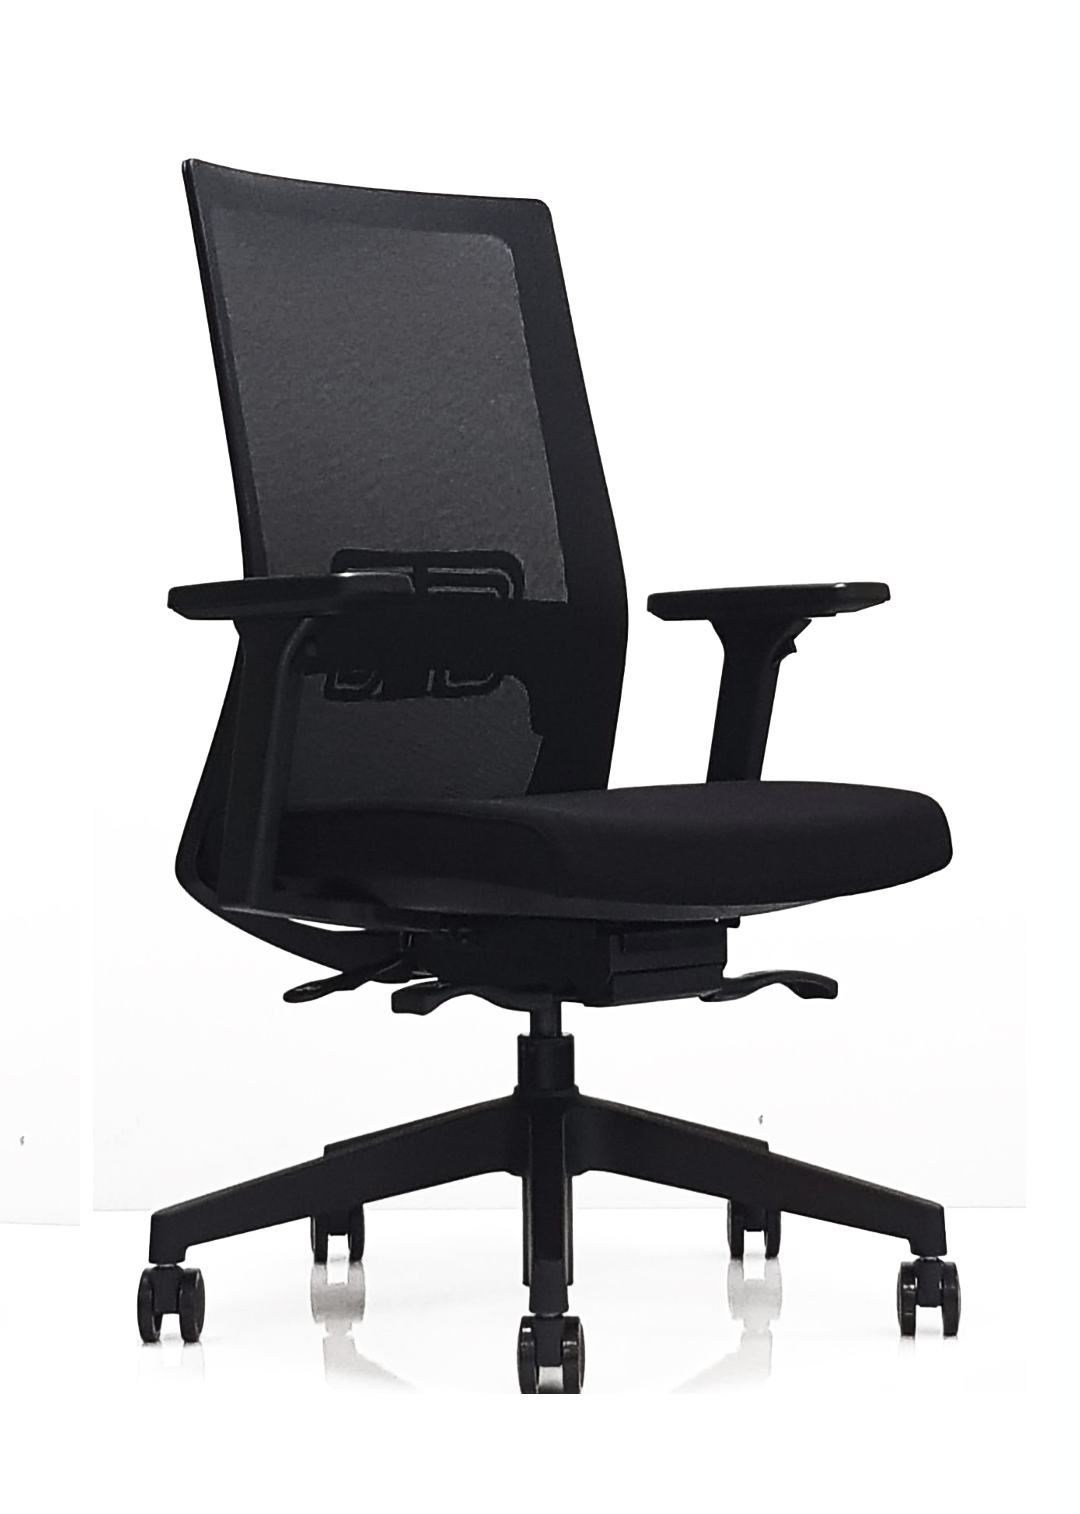 chairs with back support